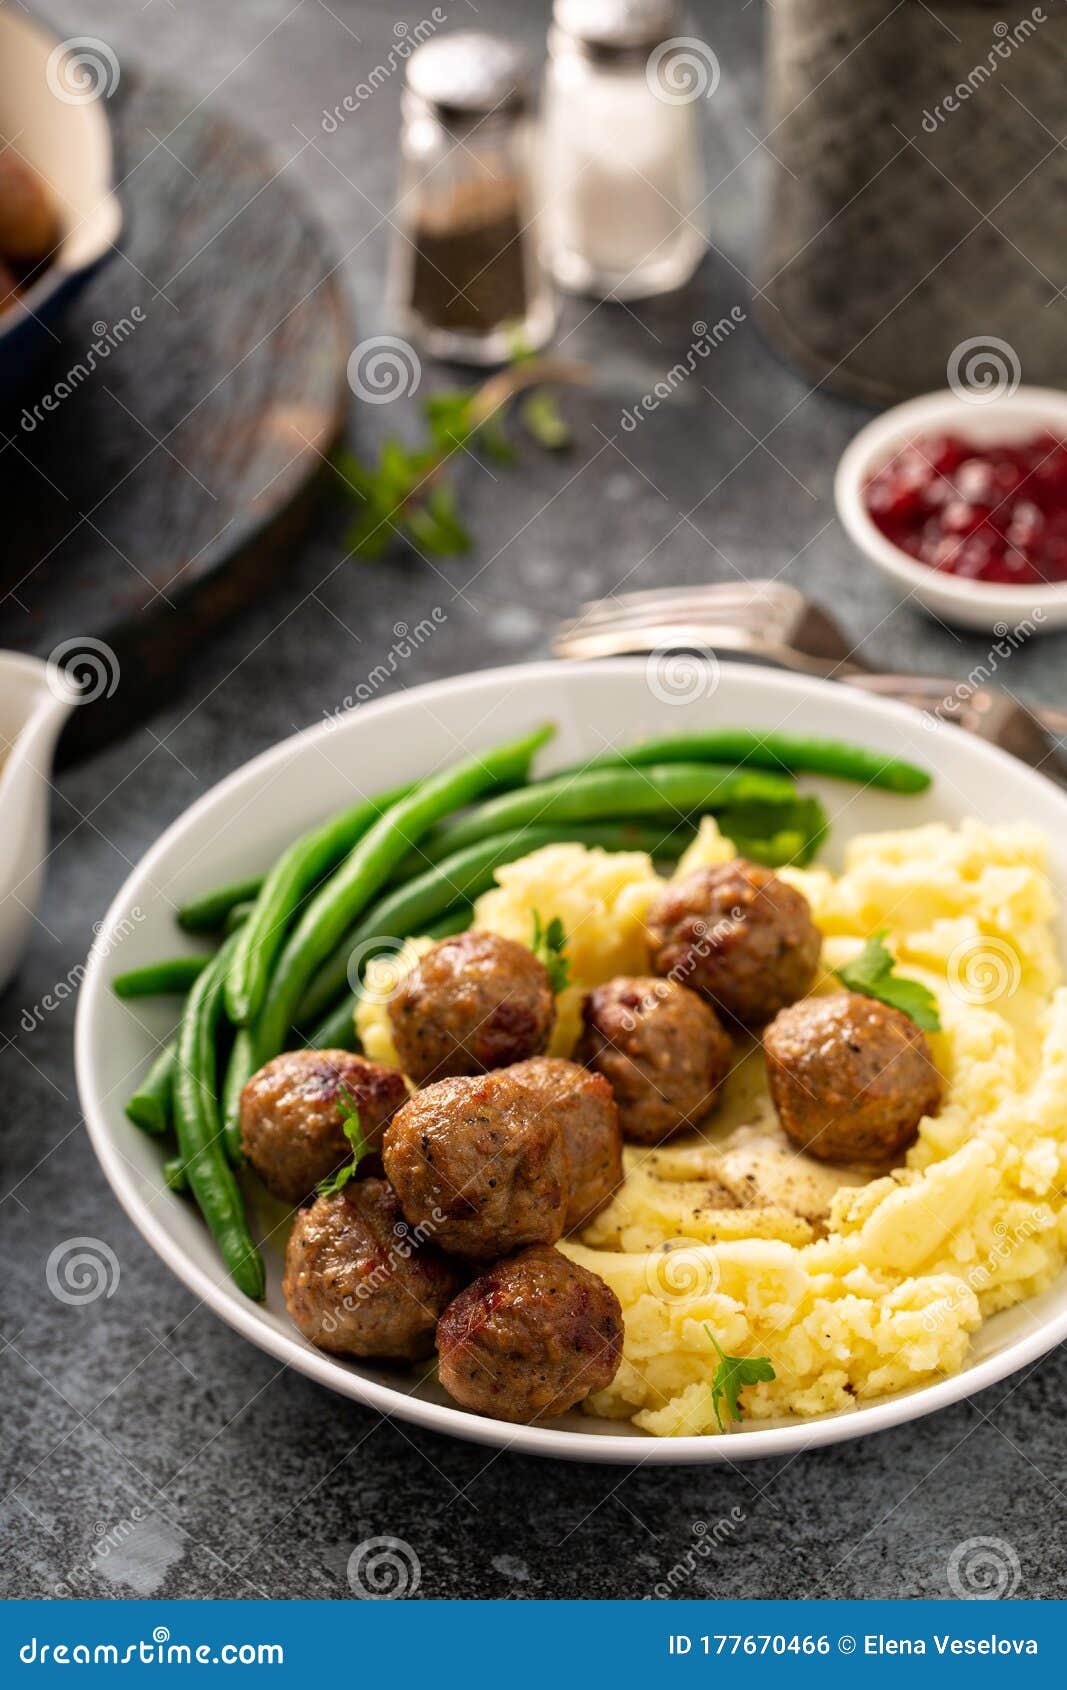 Swedish Meatballs with Mashed Potatoes Stock Photo - Image of lunch ...